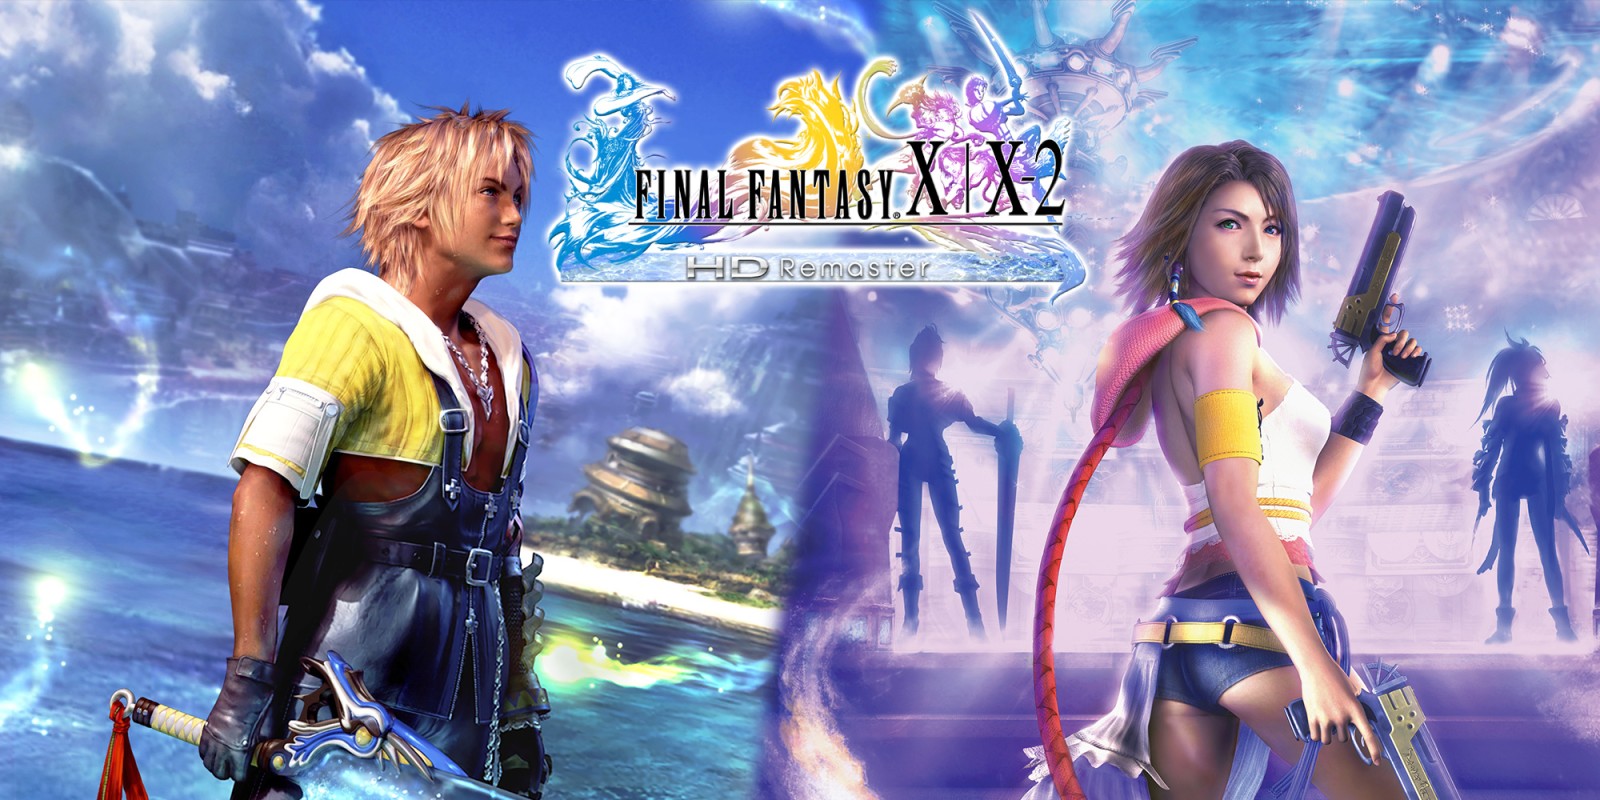 final fantasy x and x 2 switch download free